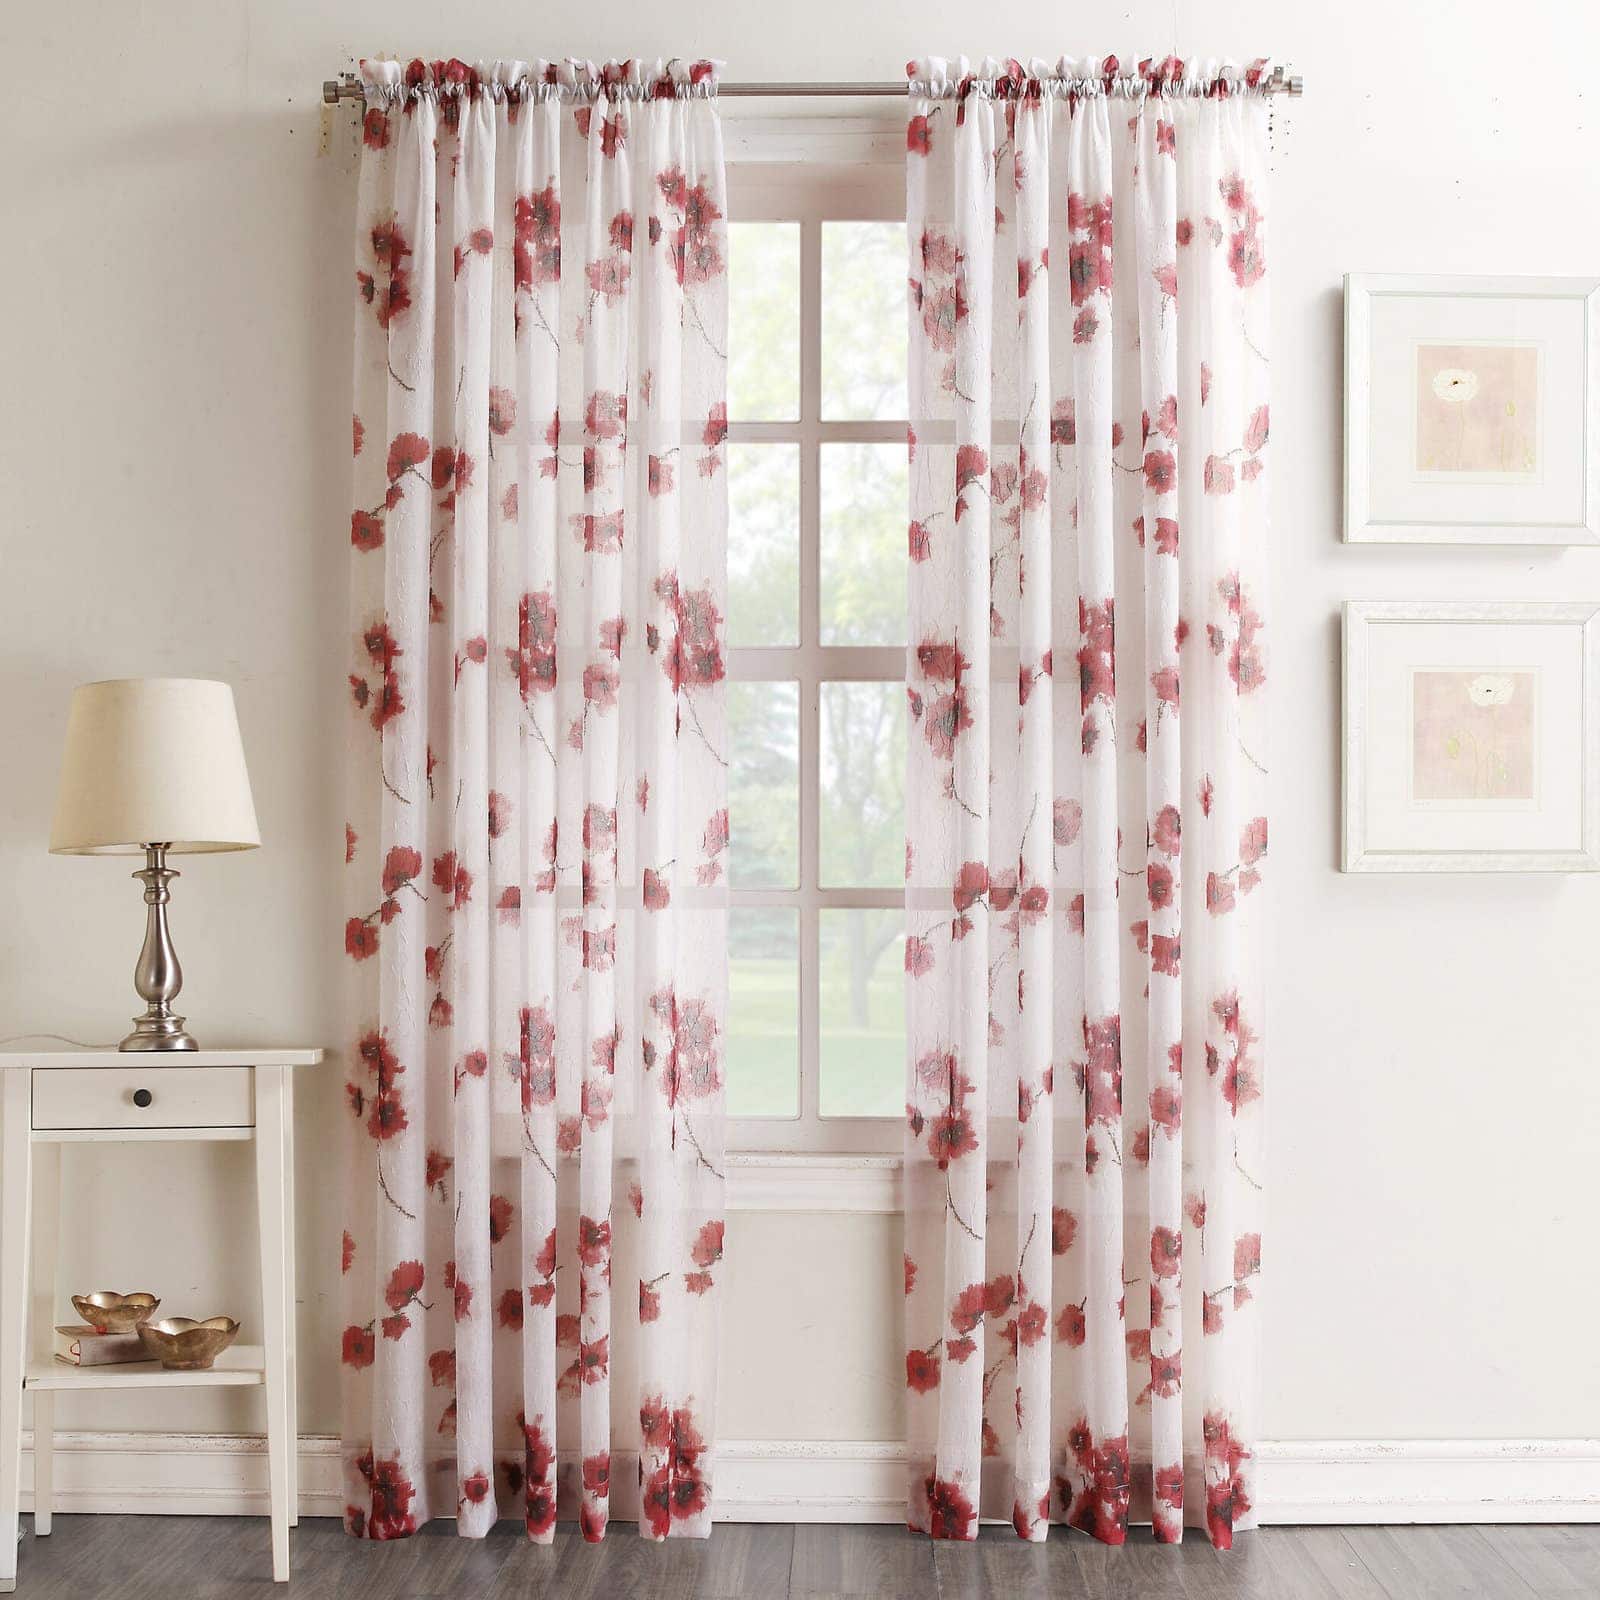 8 Get Floral Patterns on Your Sheer Curtains